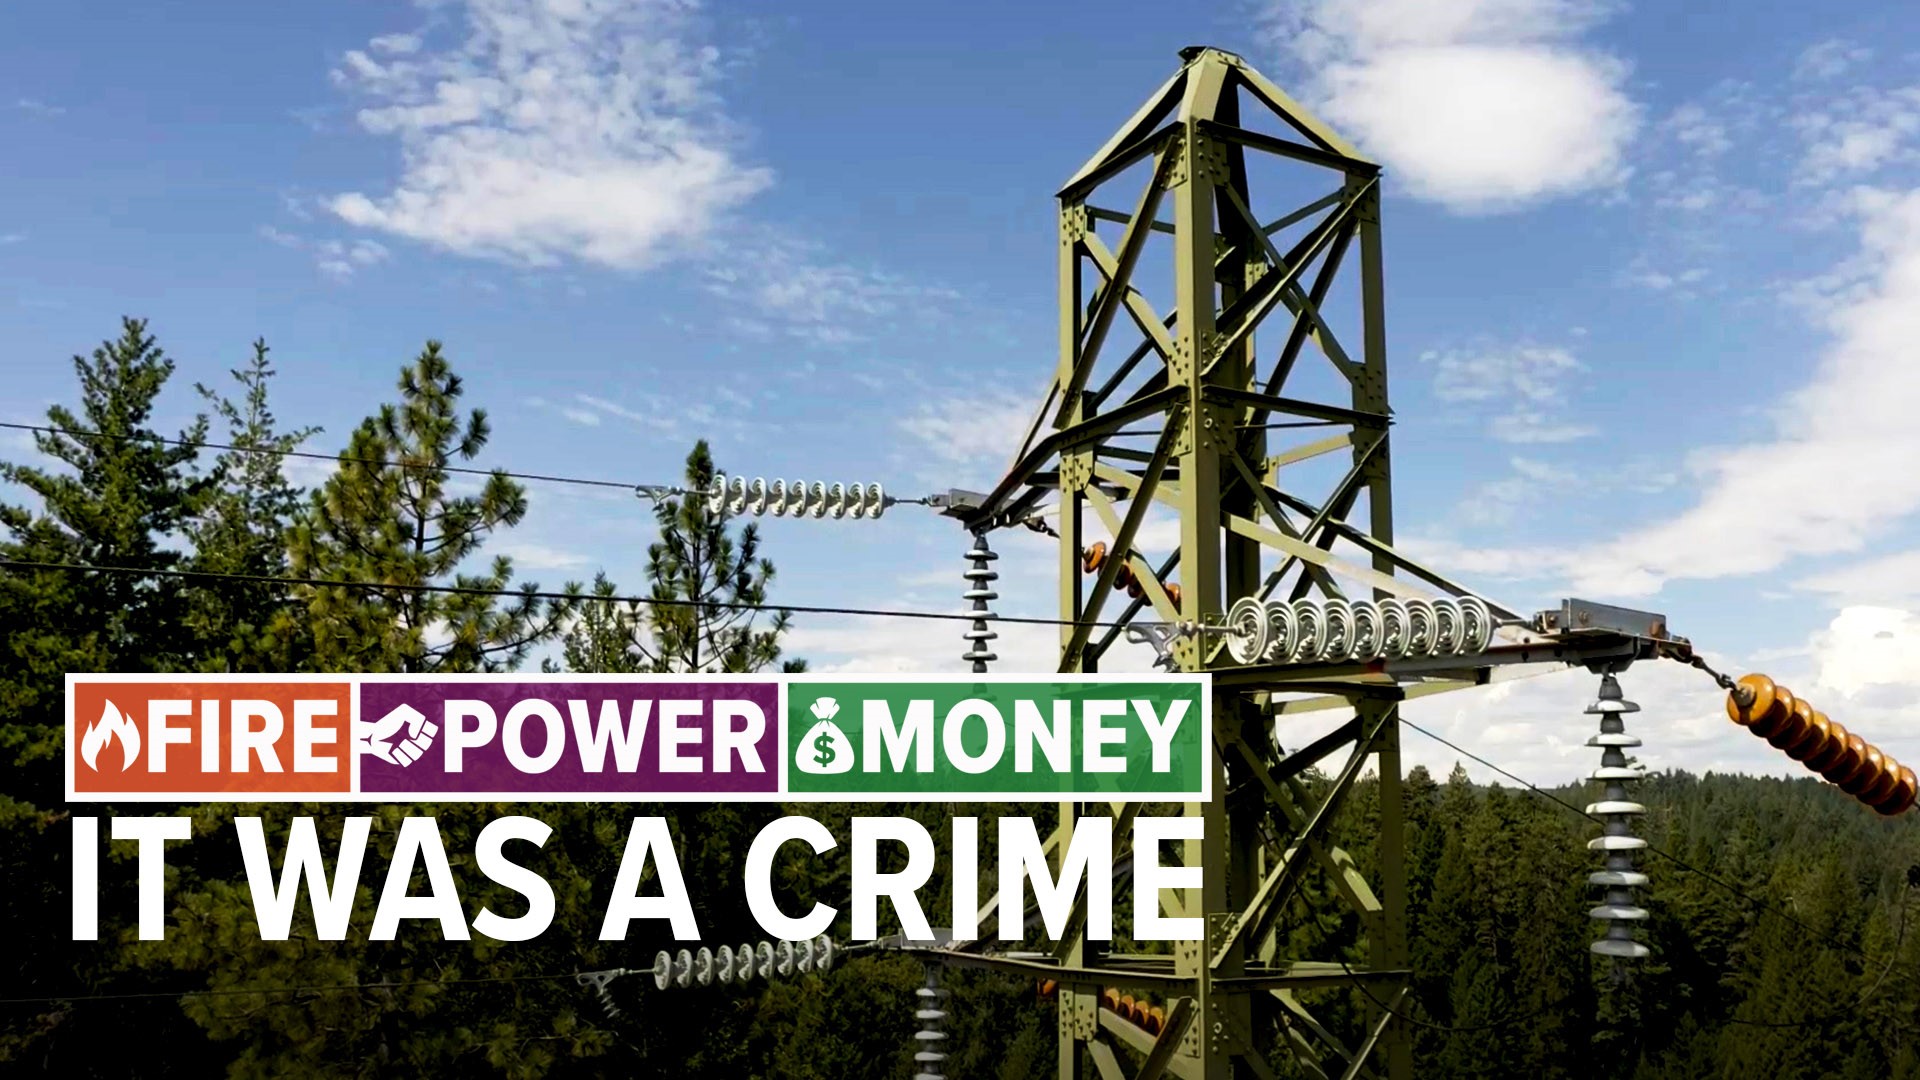 California’s biggest power company pleaded guilty to the biggest corporate homicide in U.S. history. Has PG&E really made its power lines safer?